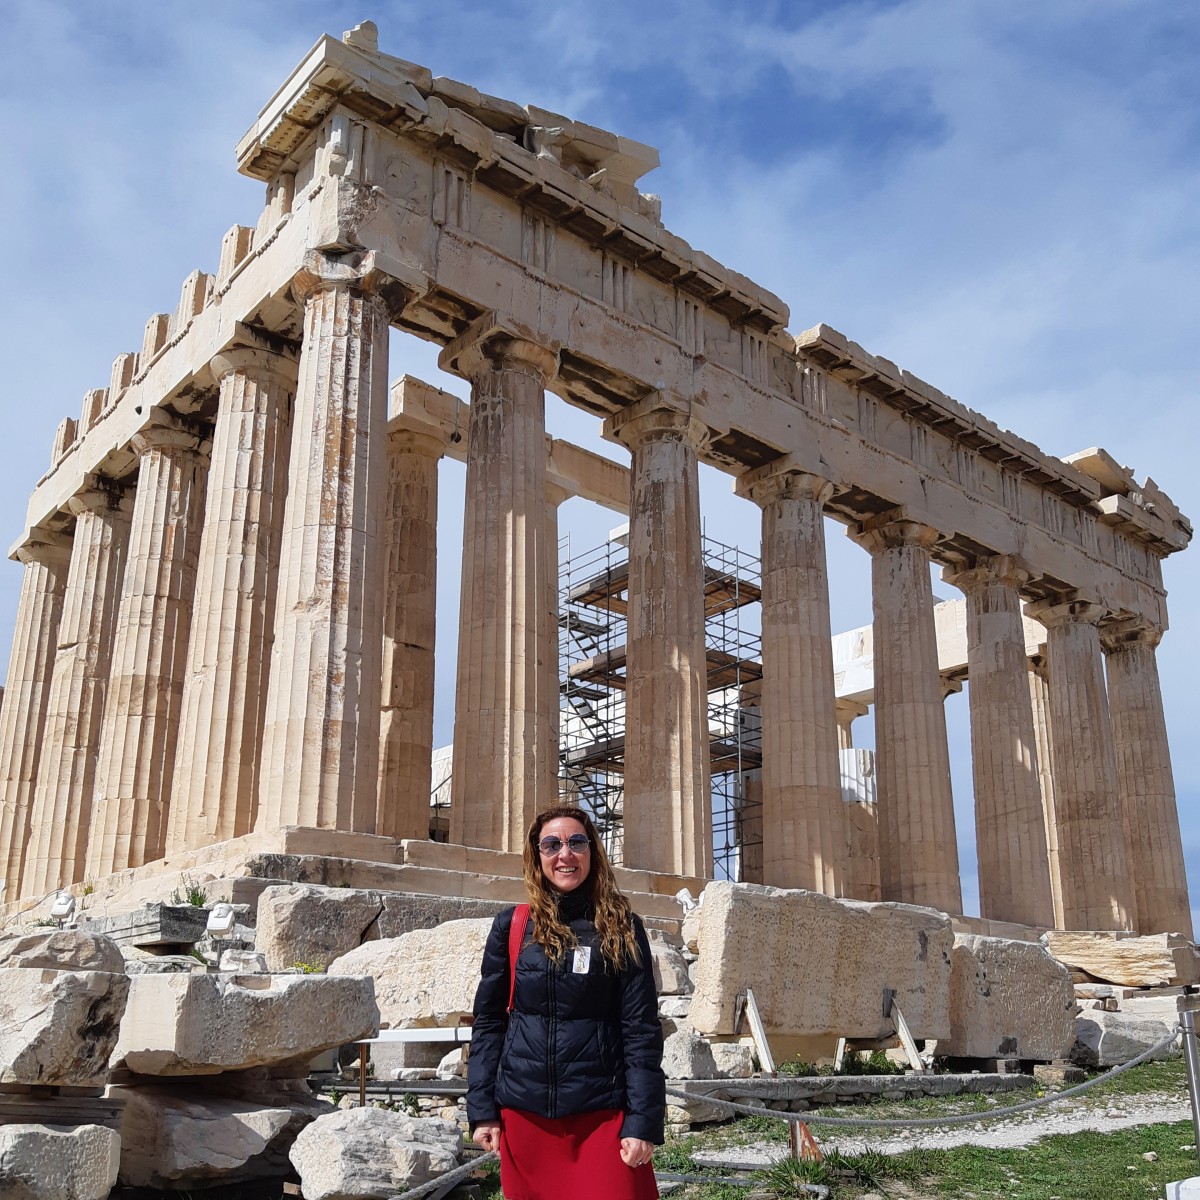 Guided tour of the Acropolis in Athens